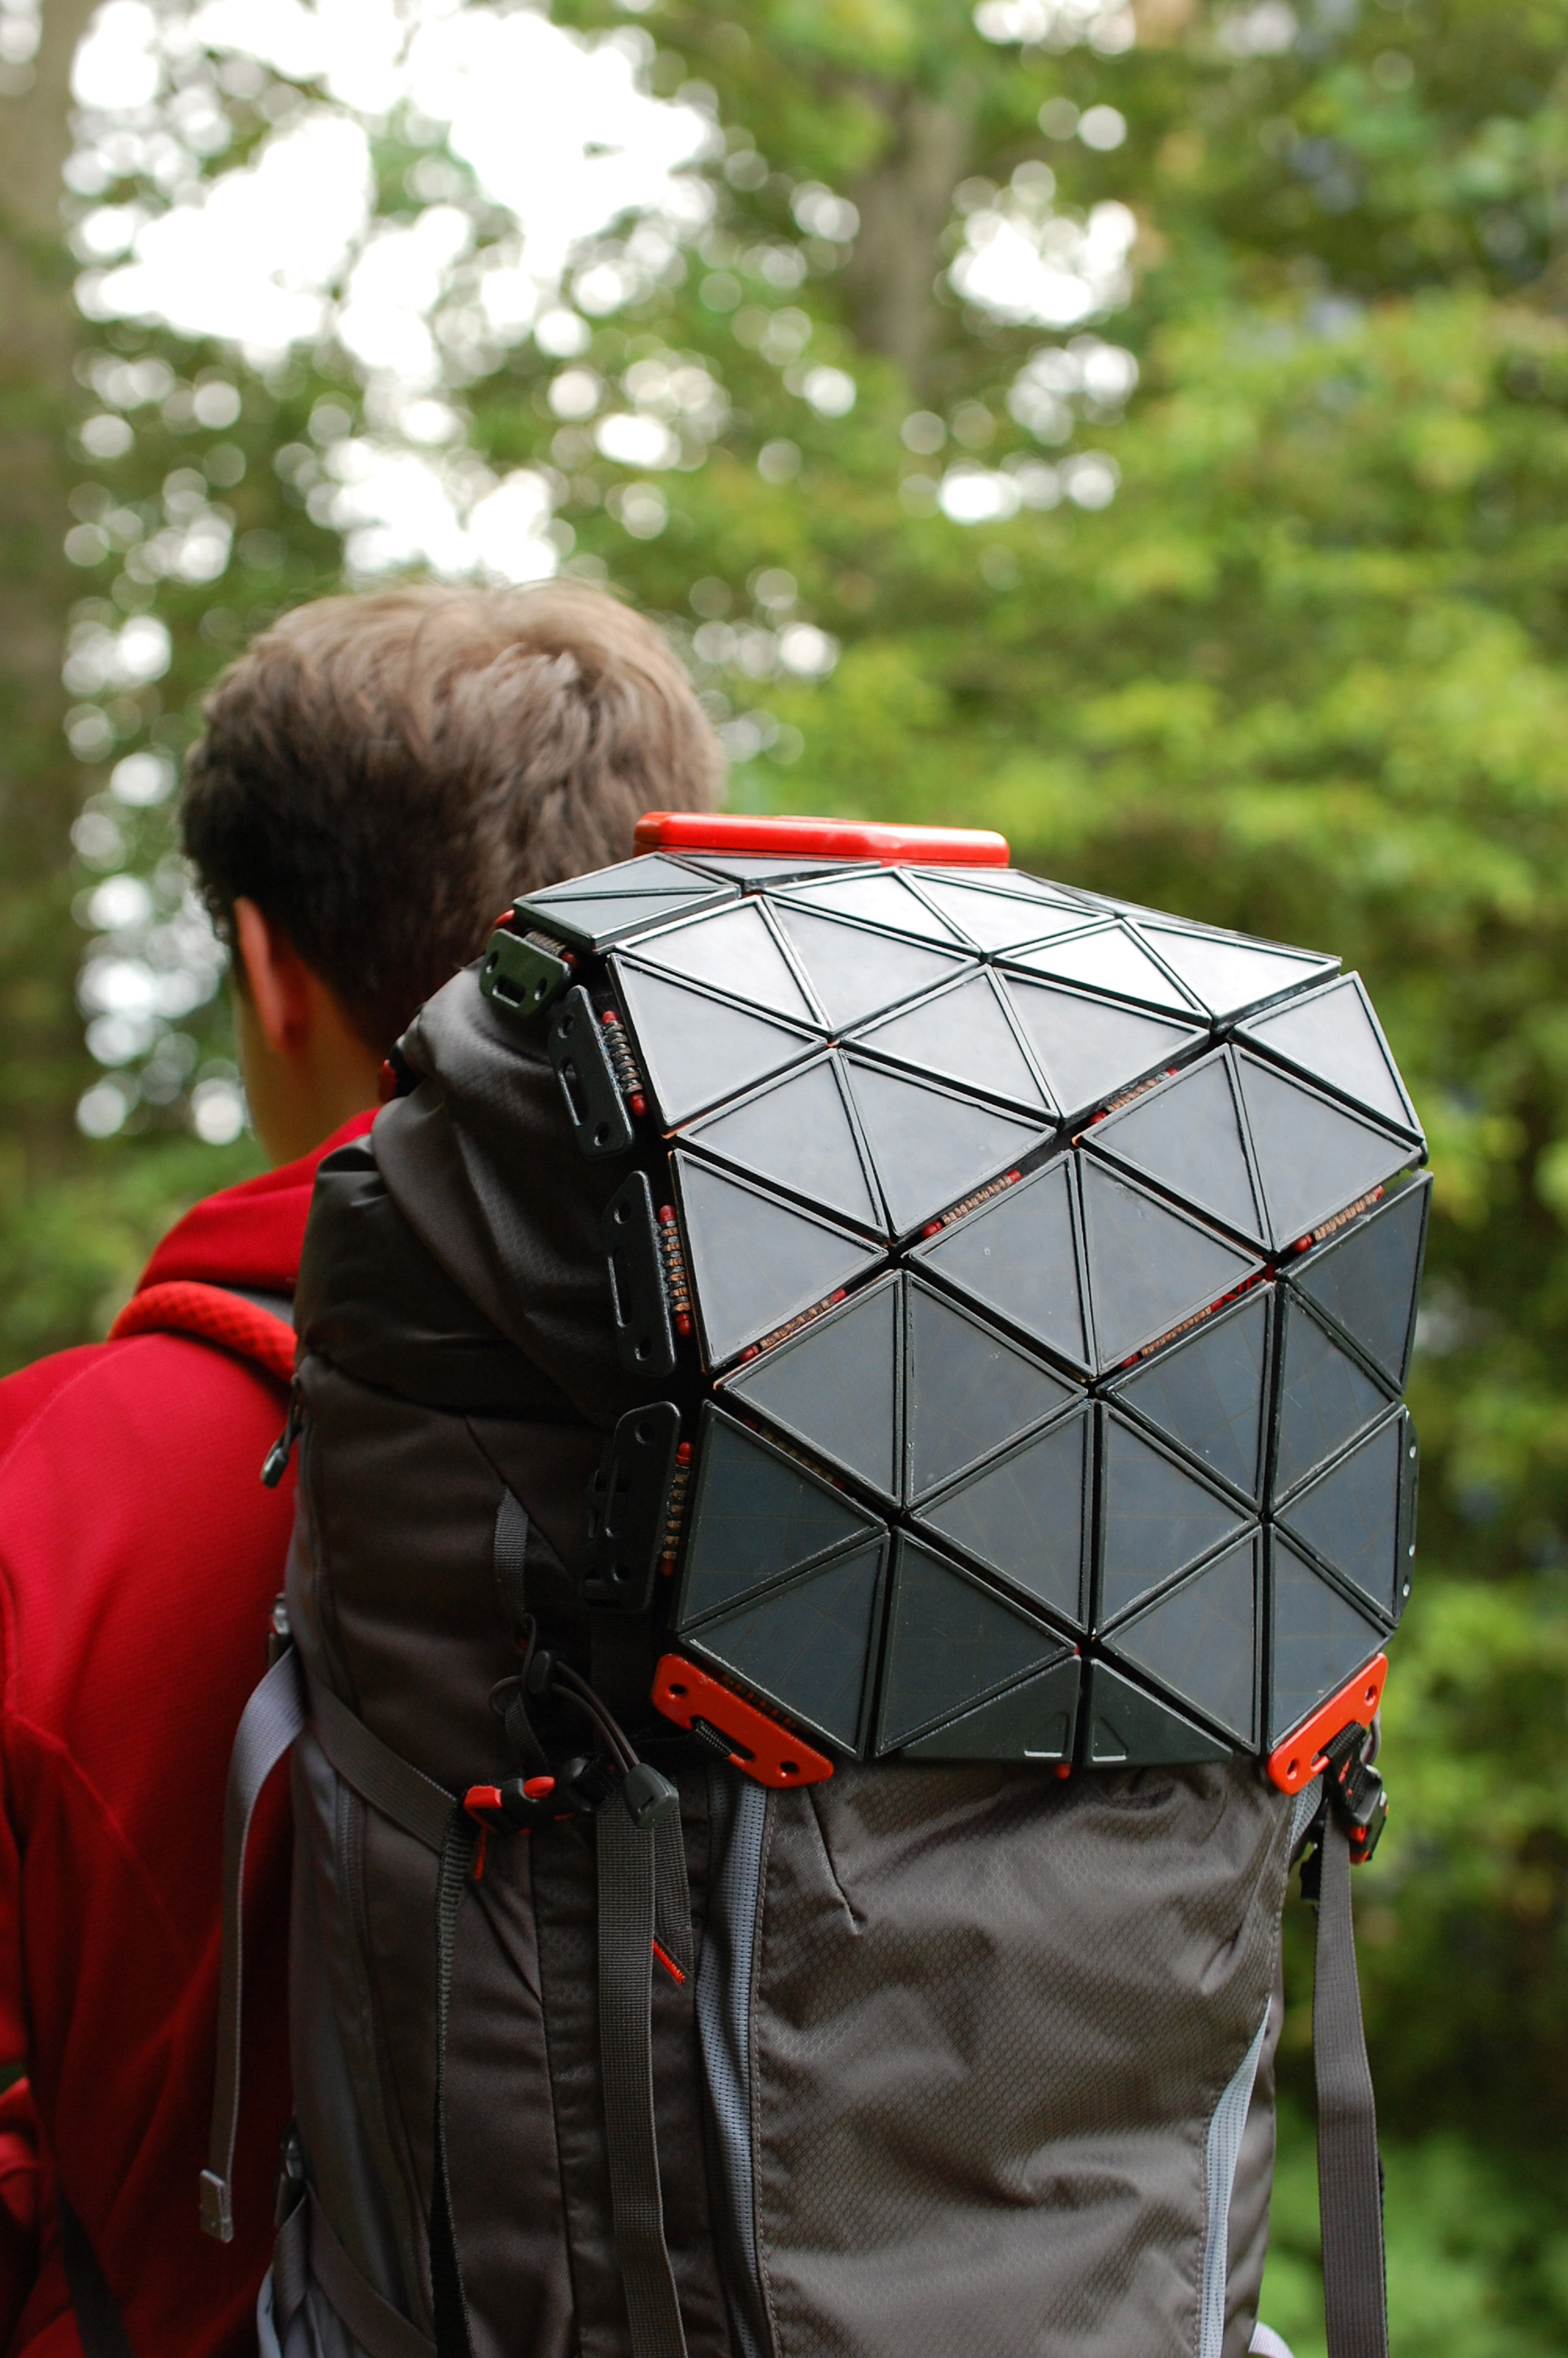 SunUp provides a backpack-hugging solar-power solution for hikers